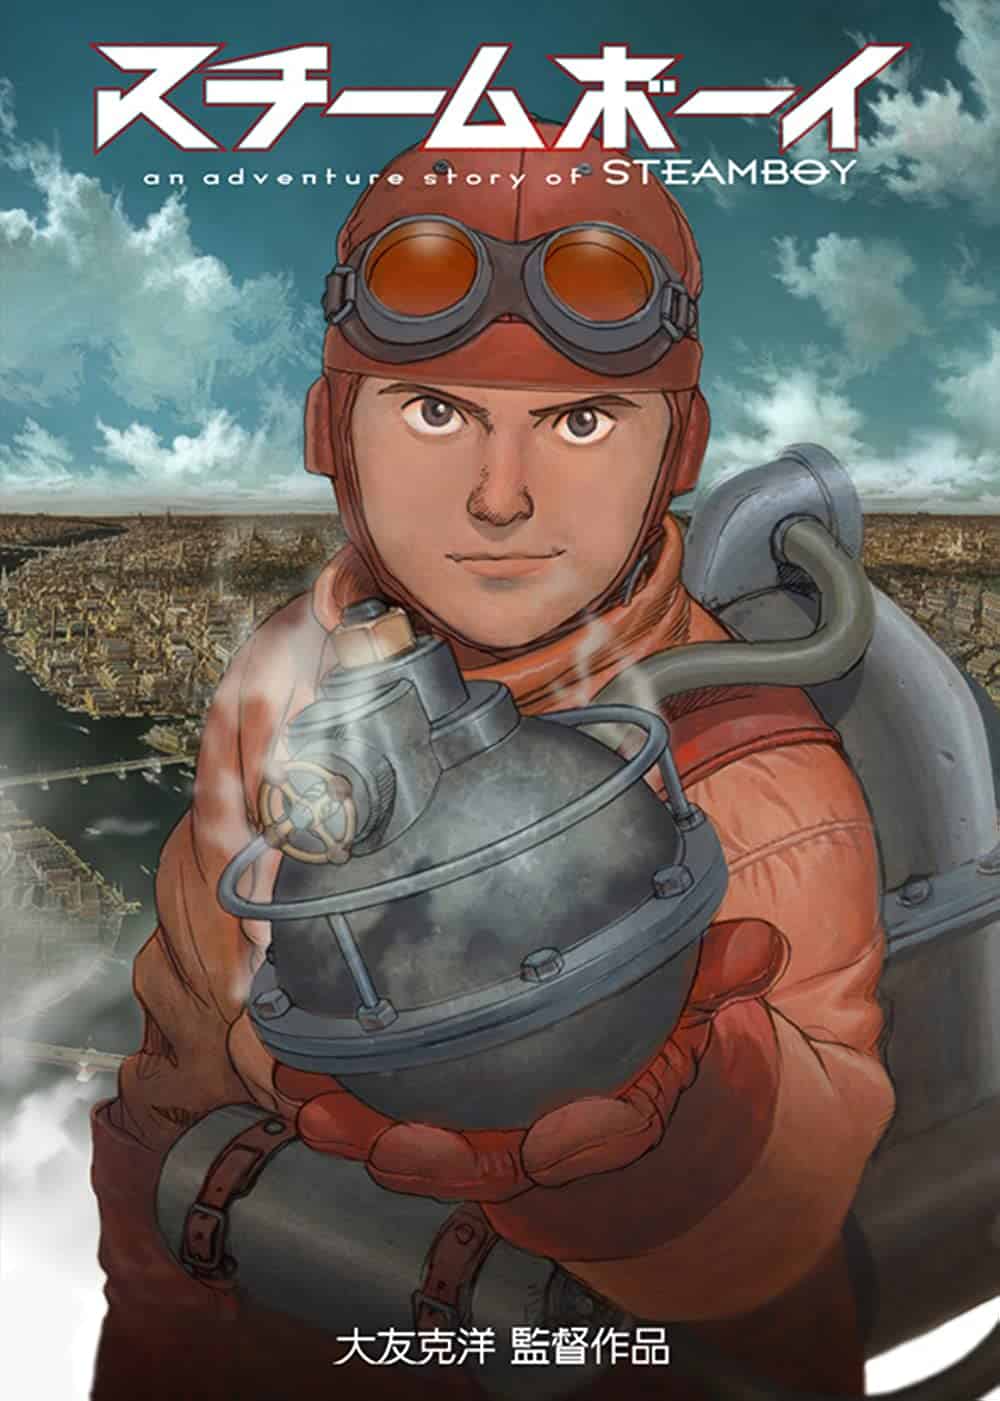 Steamboy (2004) 15 Best Steampunk Movies to Check Out